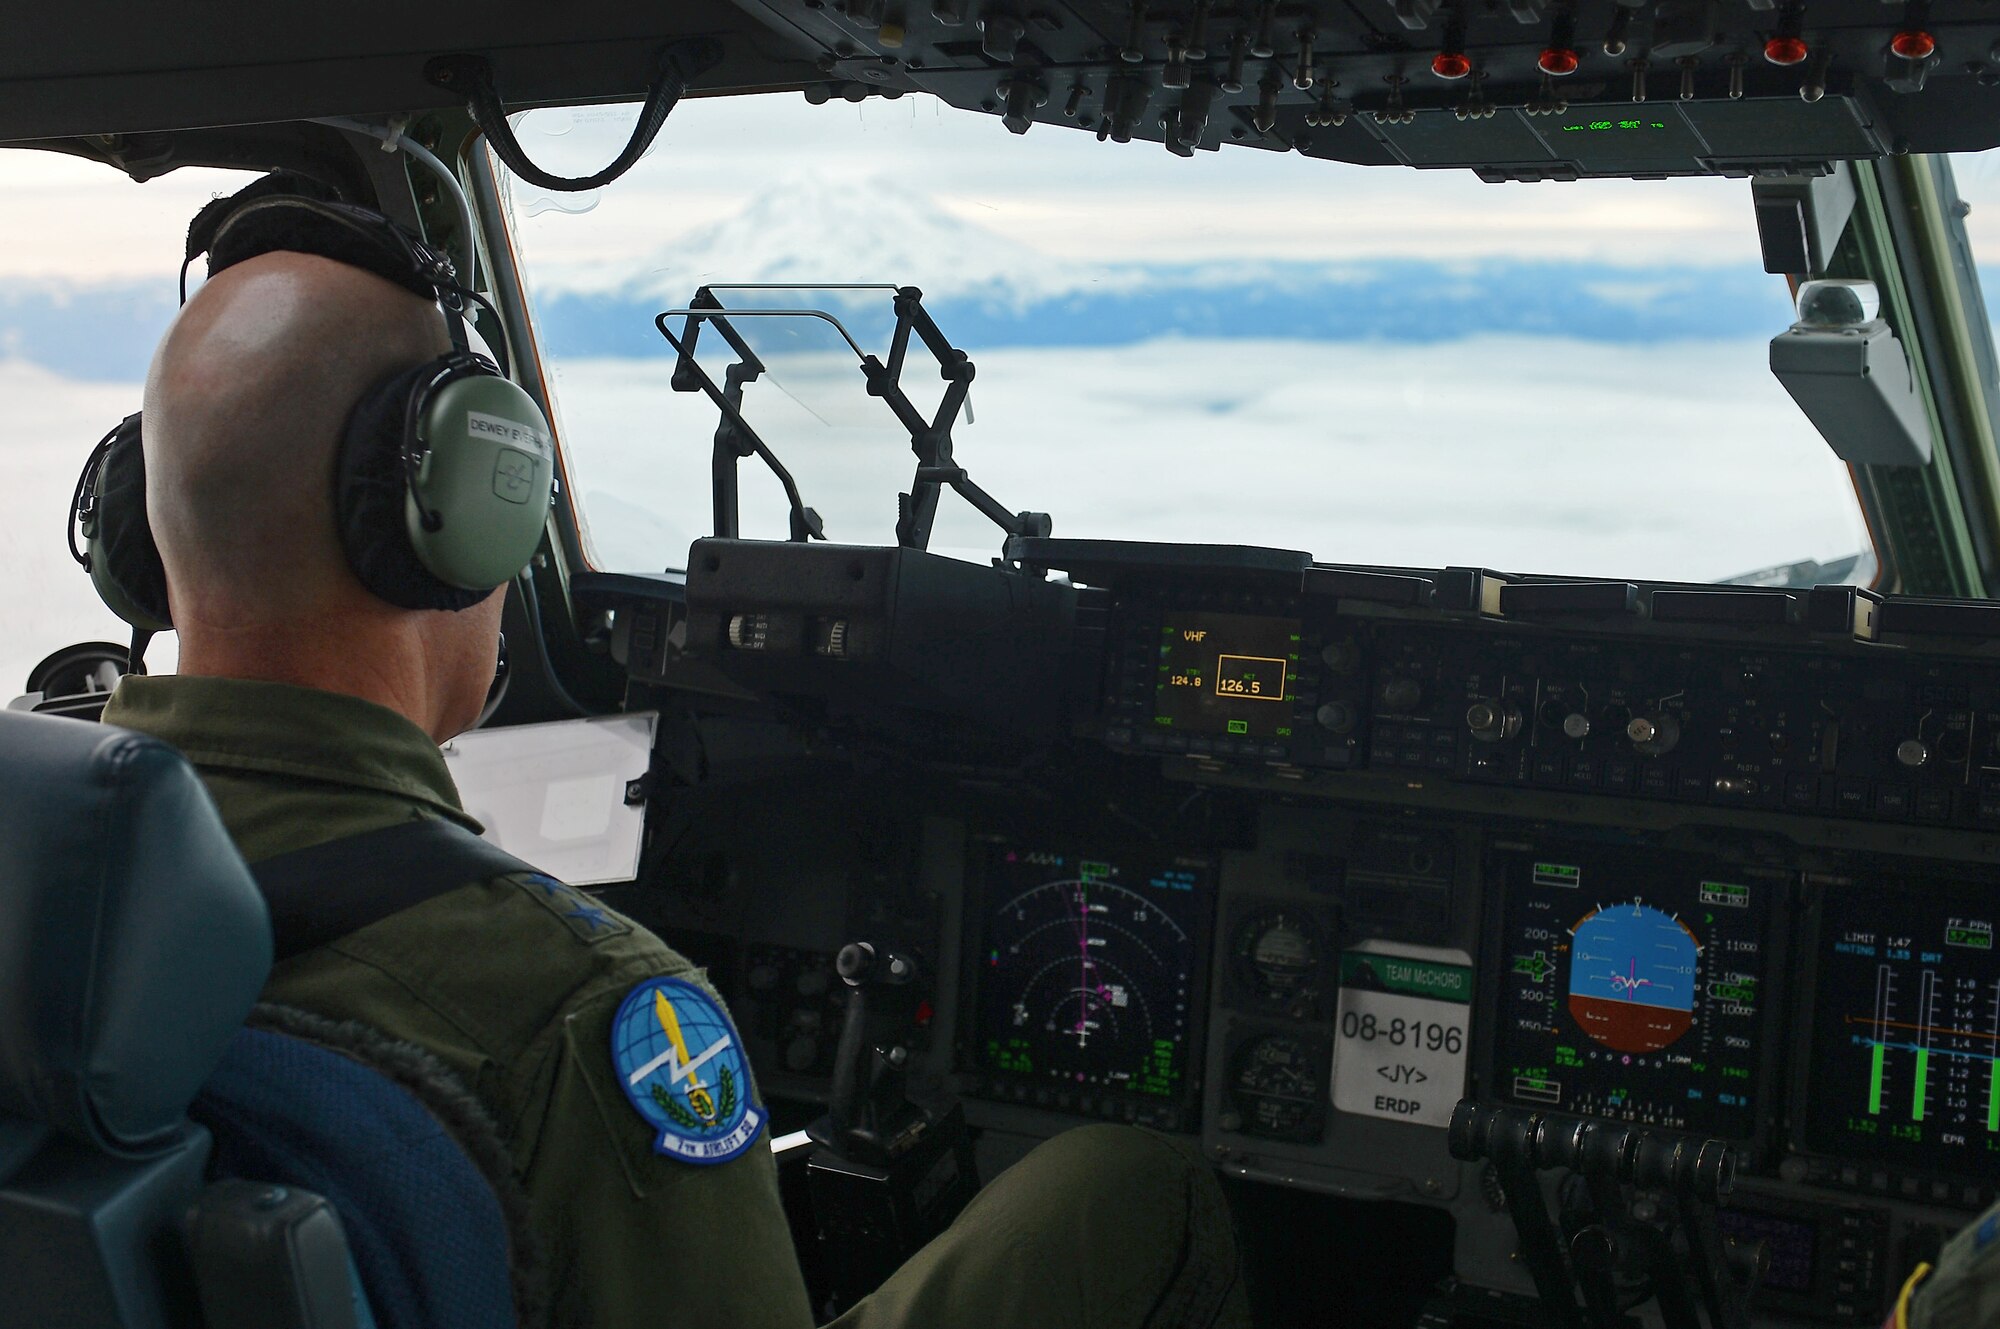 Gen. Carlton D. Everhart II, Air Mobility Command commander, flies a C-17 Globemaster III Jan. 30, 2017 during his visit to Joint Base Lewis-McChord, Wash. In addition to executing a C-17 training sortie, visiting Boeing, and talking with Airmen and Soldiers here, Everhart attended a civic leader dinner where he met with community partners. (U.S. Air Force photo by Senior Airman Divine Cox)